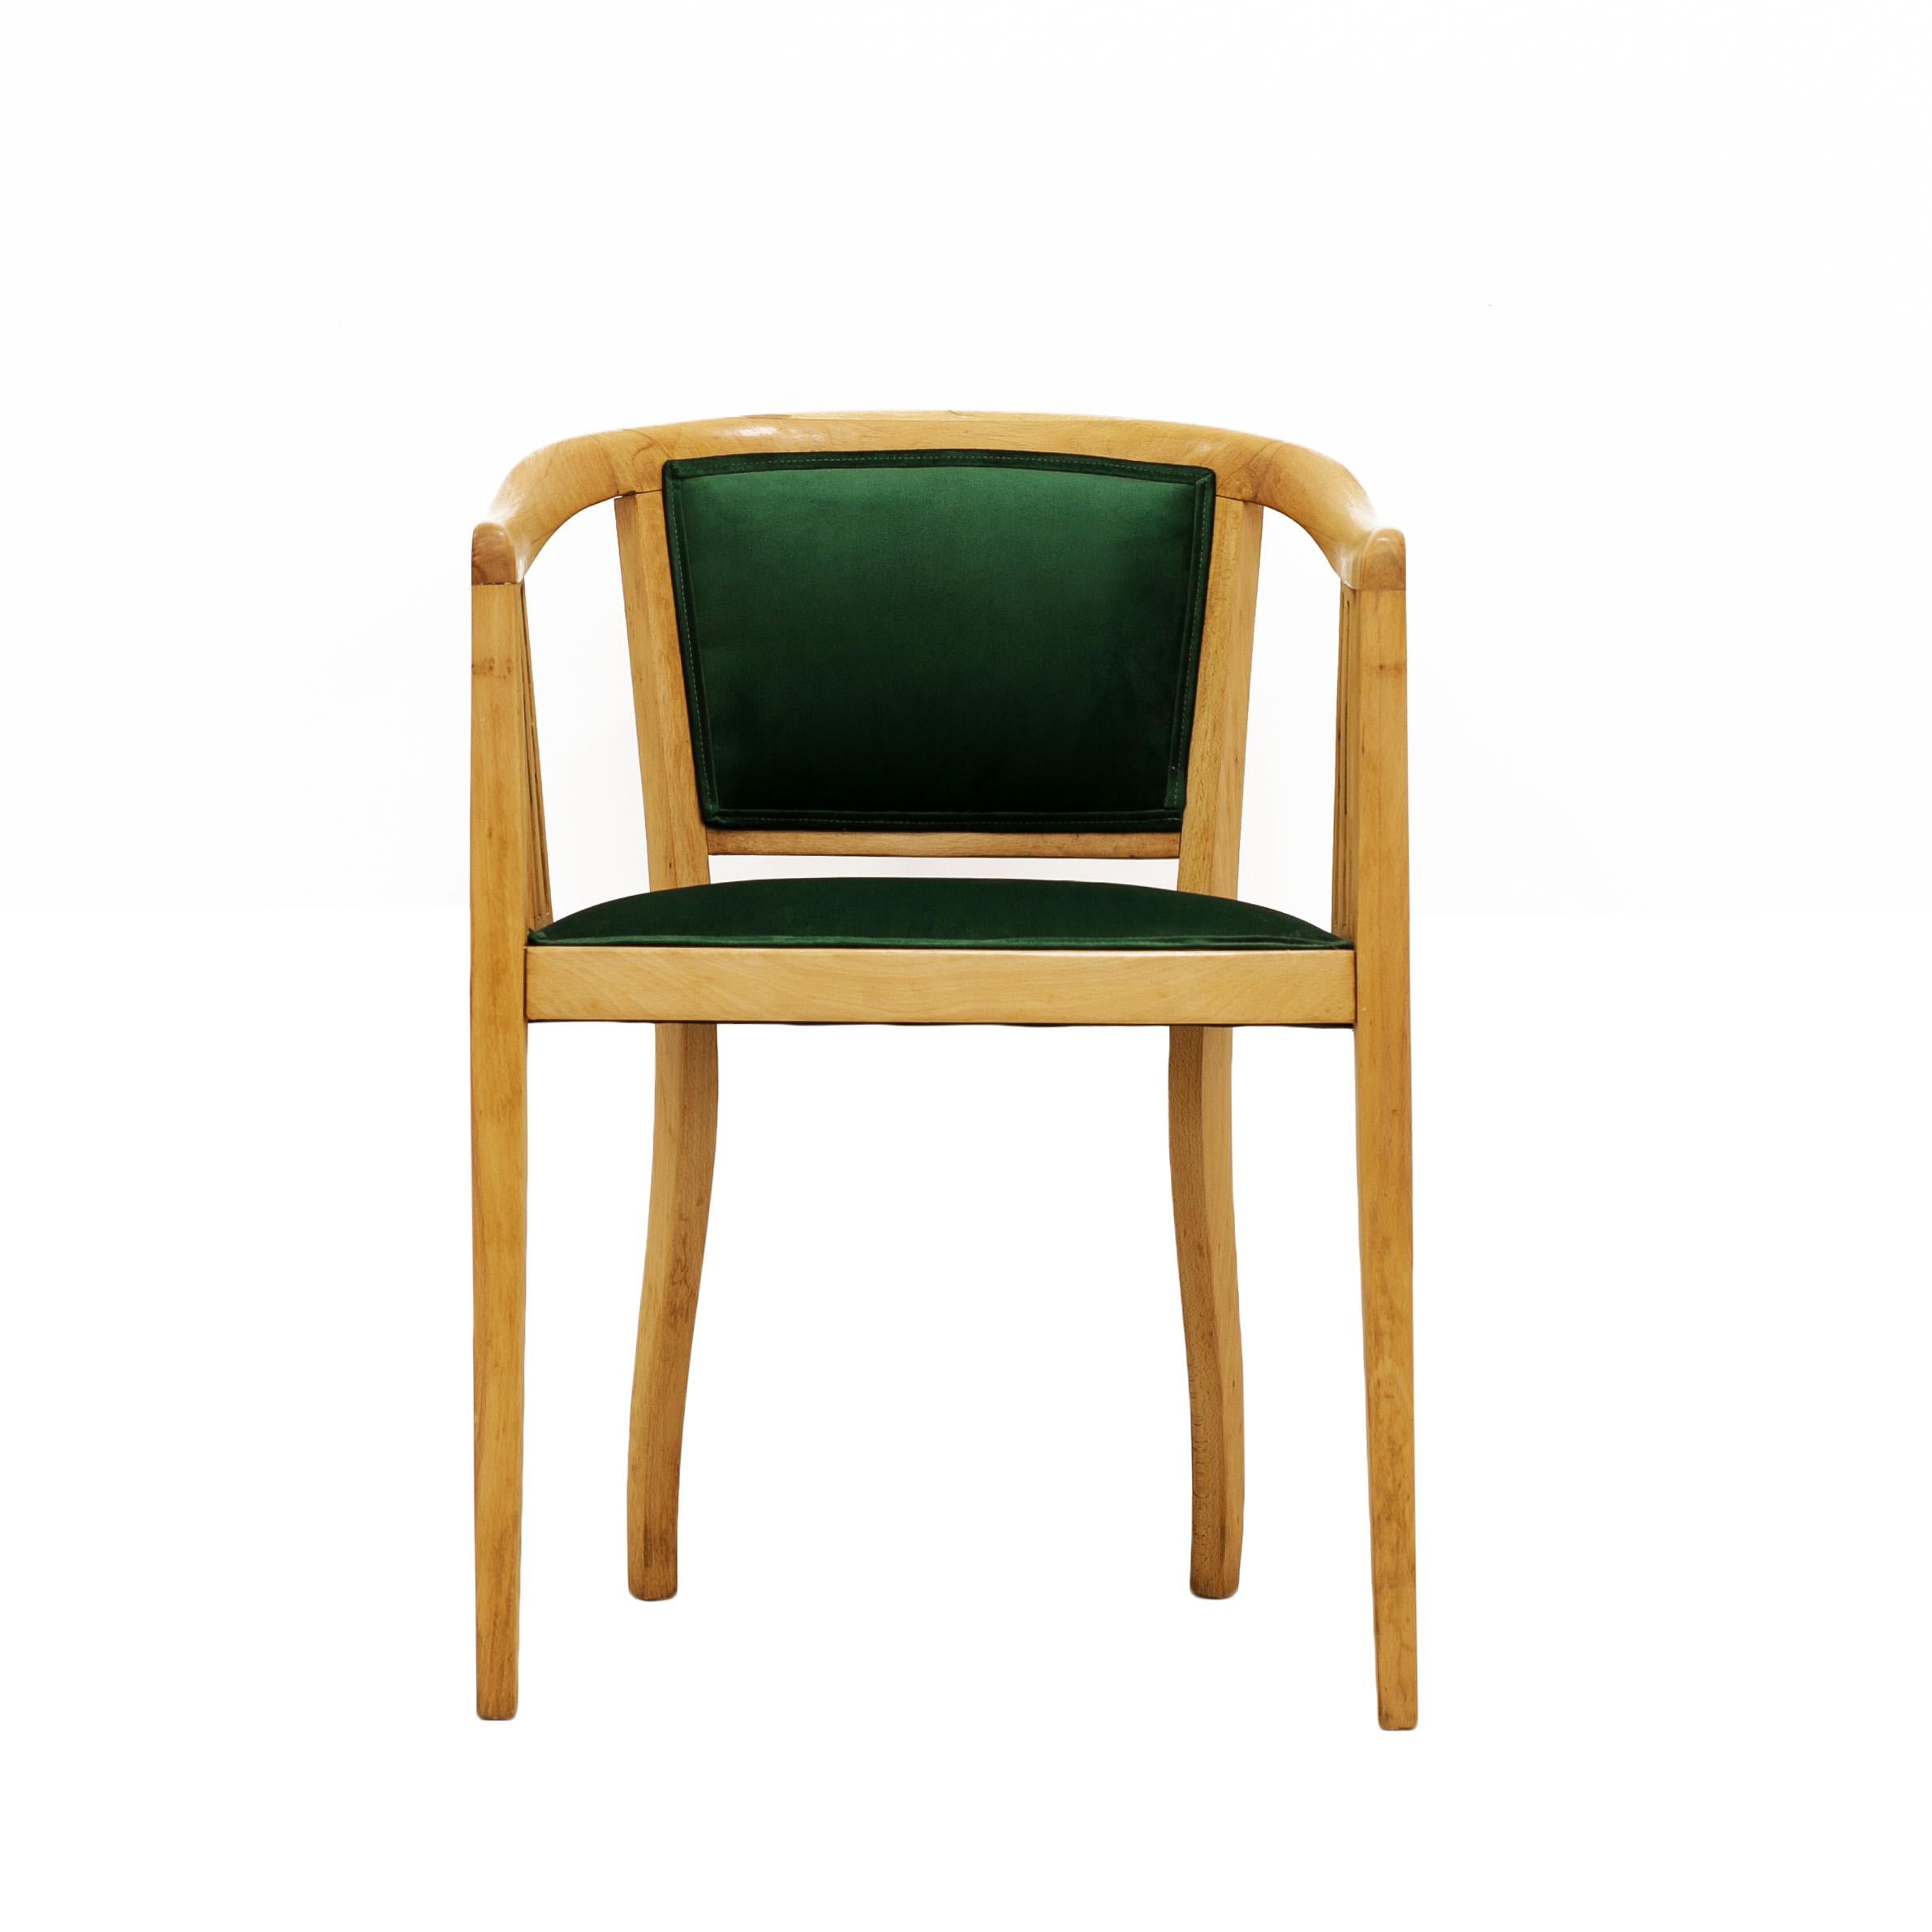 This chair with armrests dates back to the 1920s and was made in Germany. The piece is made of birch wood. The furniture was professionally renovated - the construction was solidly strengthened and the wooden surfaces were protected with oil of the